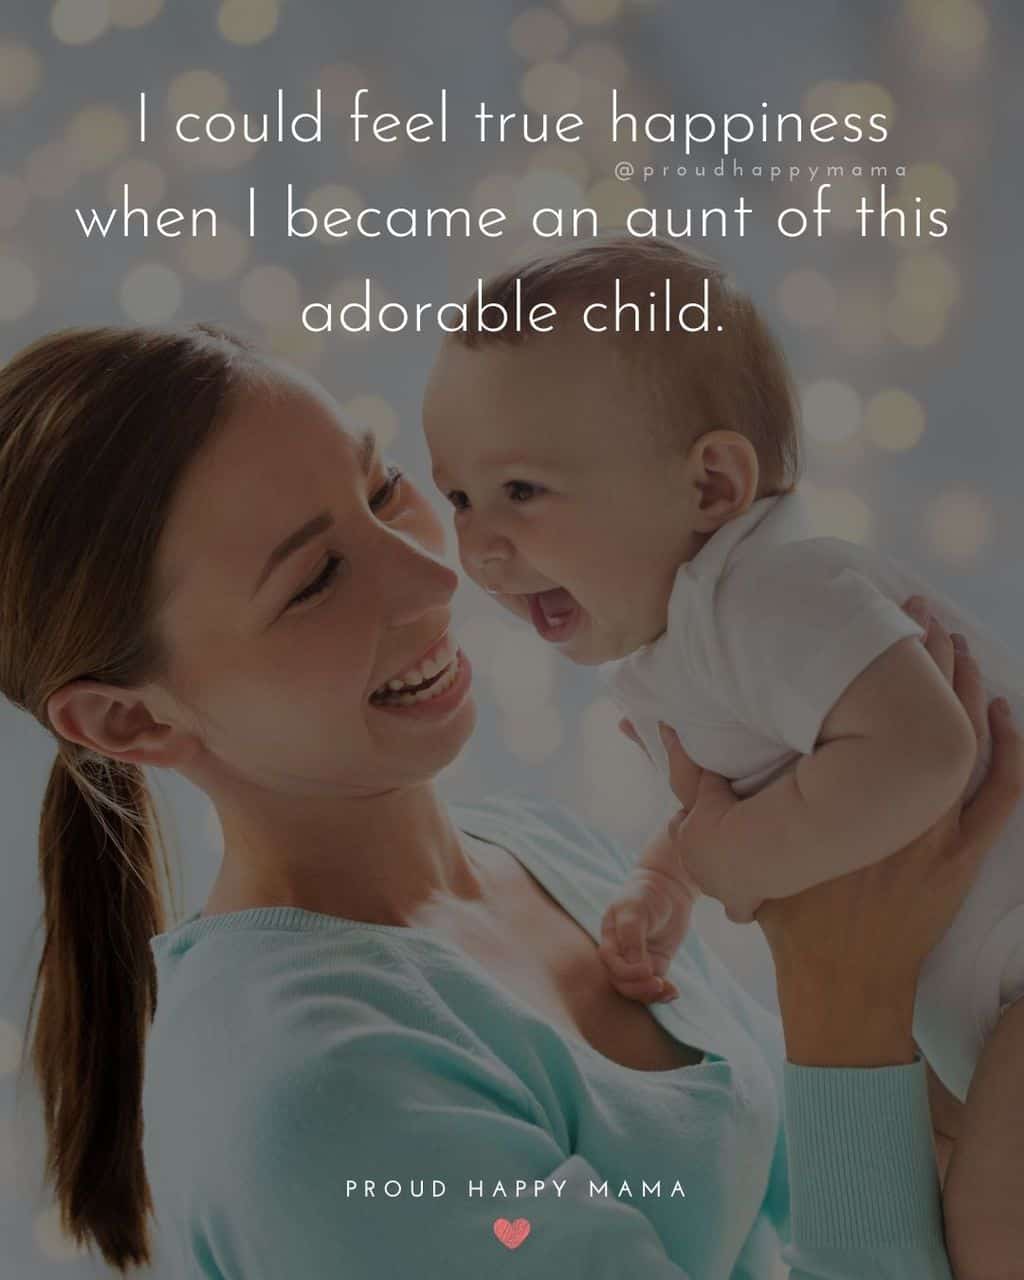 35+ BEST Quotes About Becoming An Aunt For The First Time